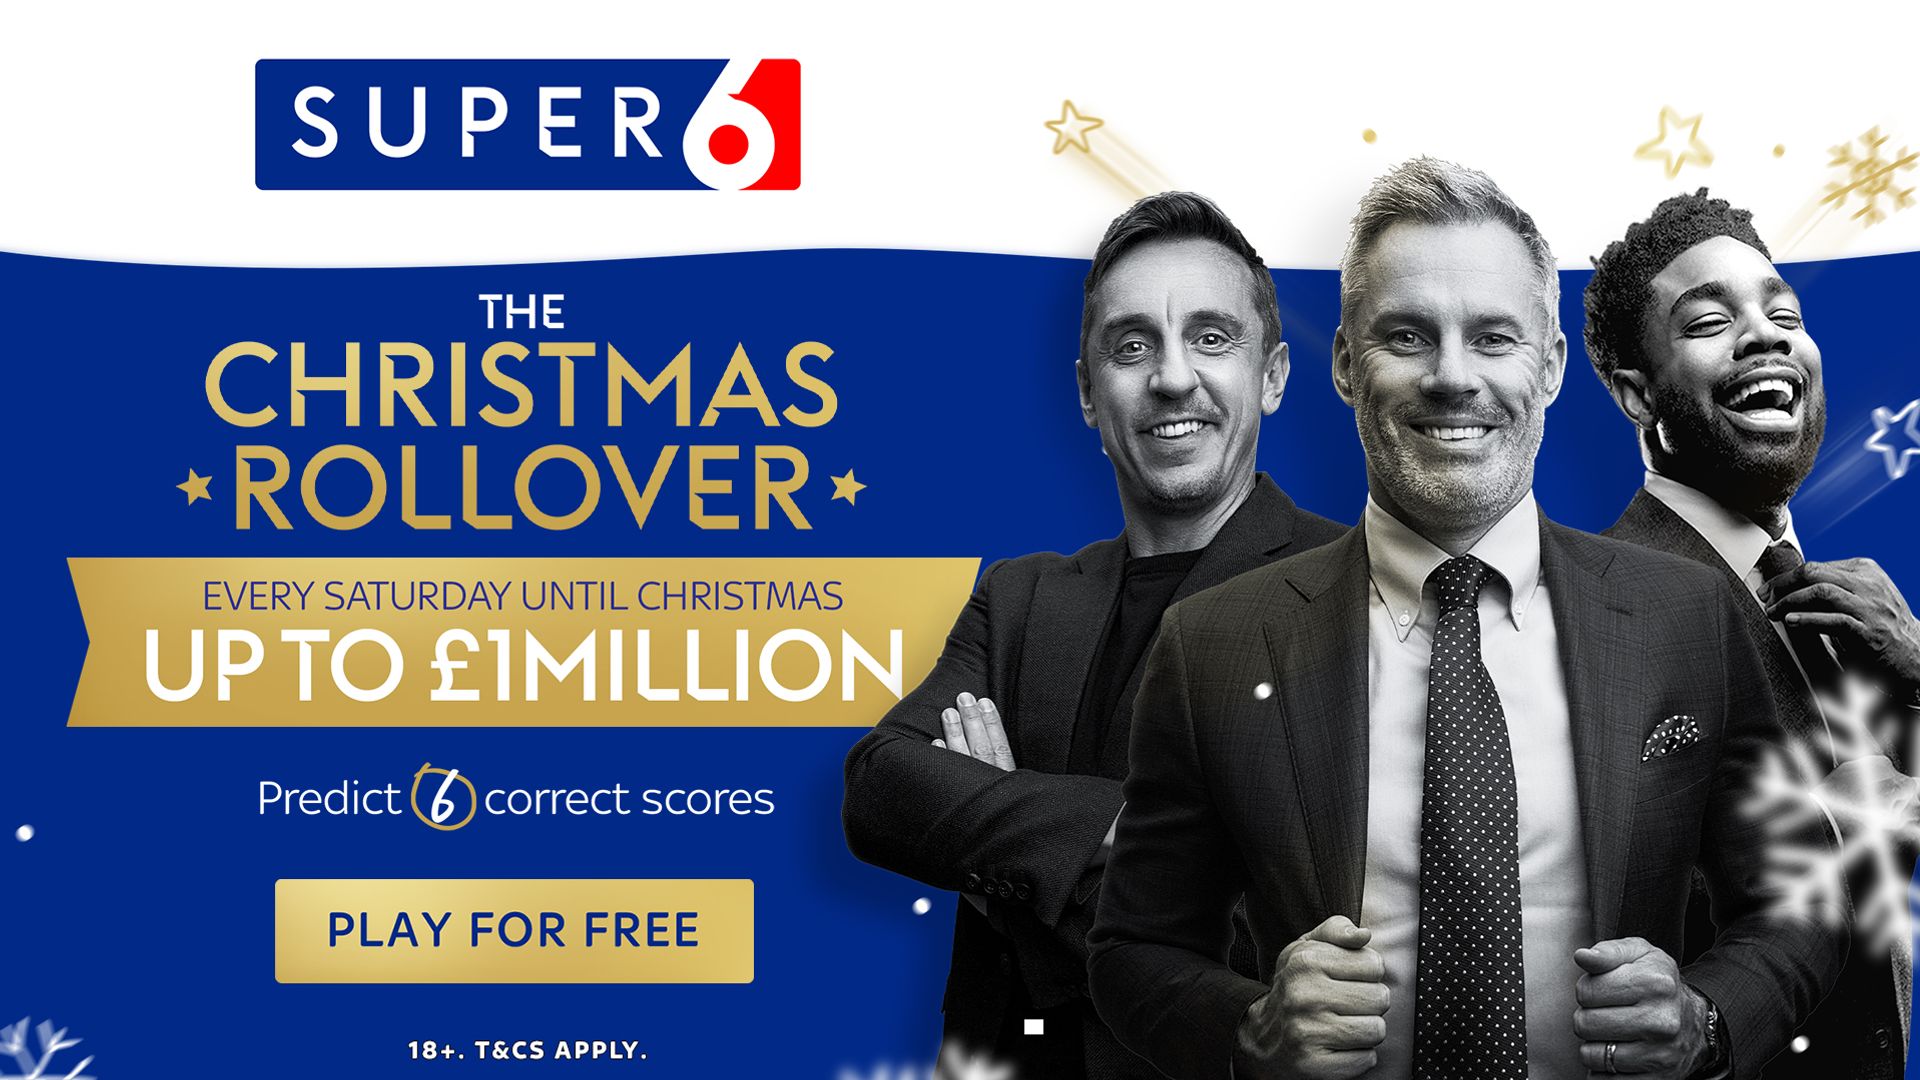 The Super 6 £1m Christmas Rollover